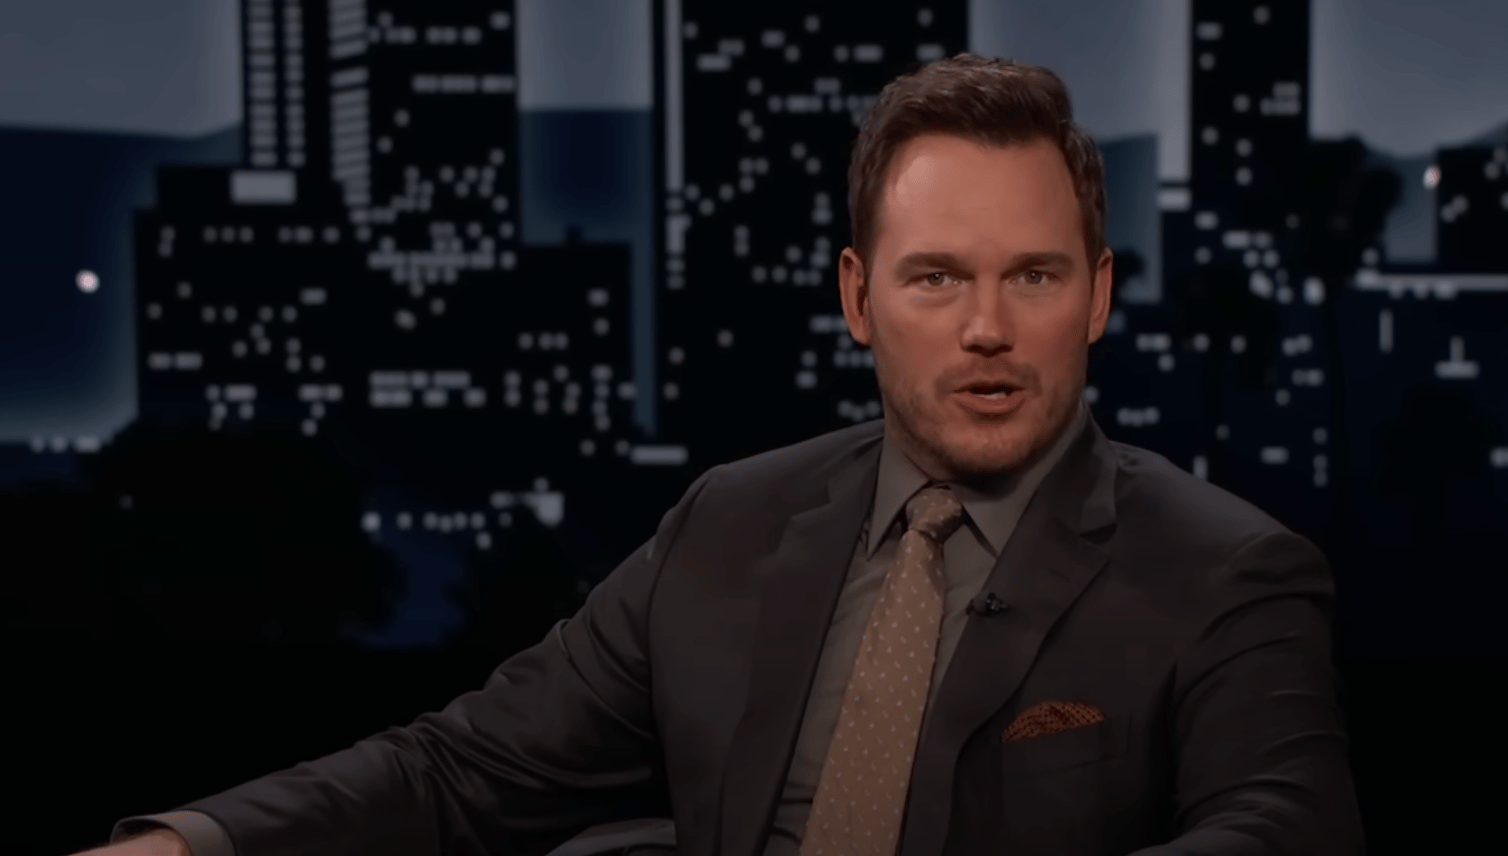 Chris Pratt Says ‘Every Dad Secretly Fantasizes’ About What They’d Do If Someone Messed With Their Kids